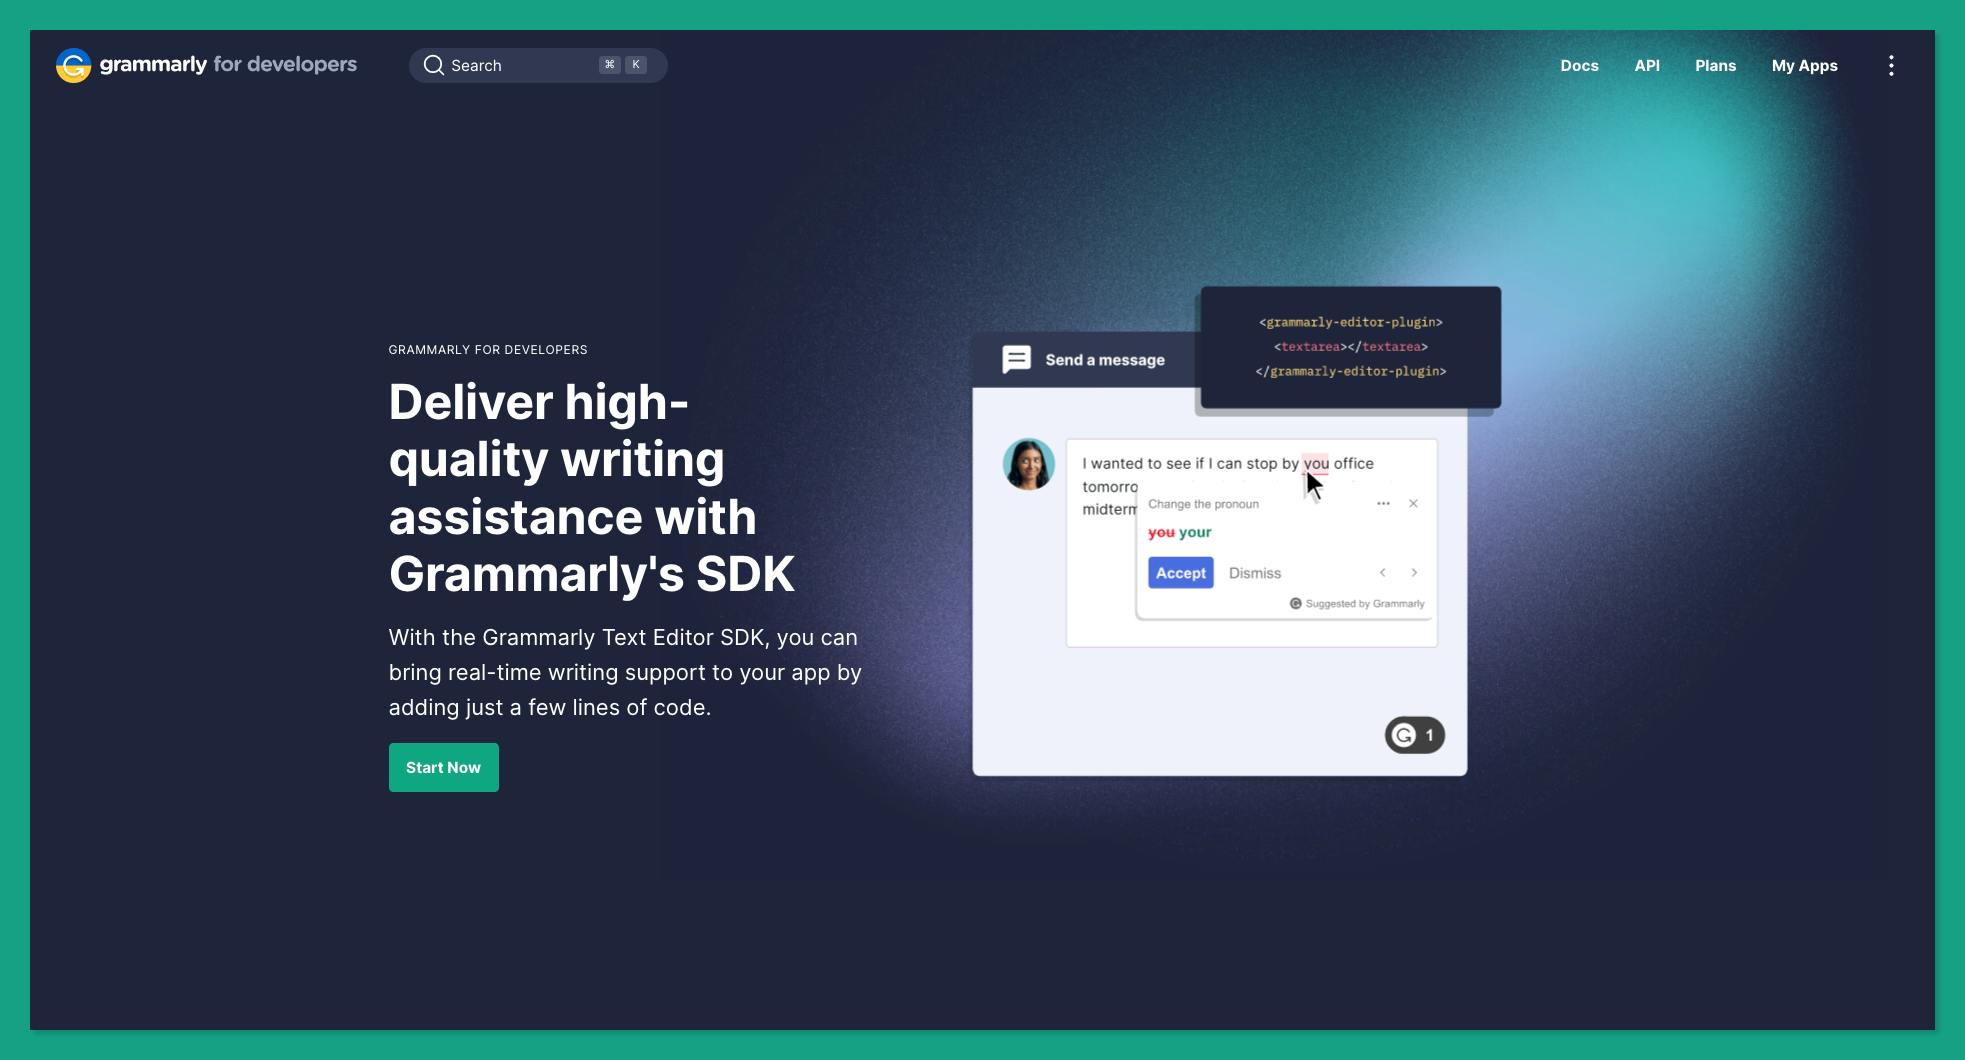 Deliver high-quality writing assistance with Grammarly's SDK